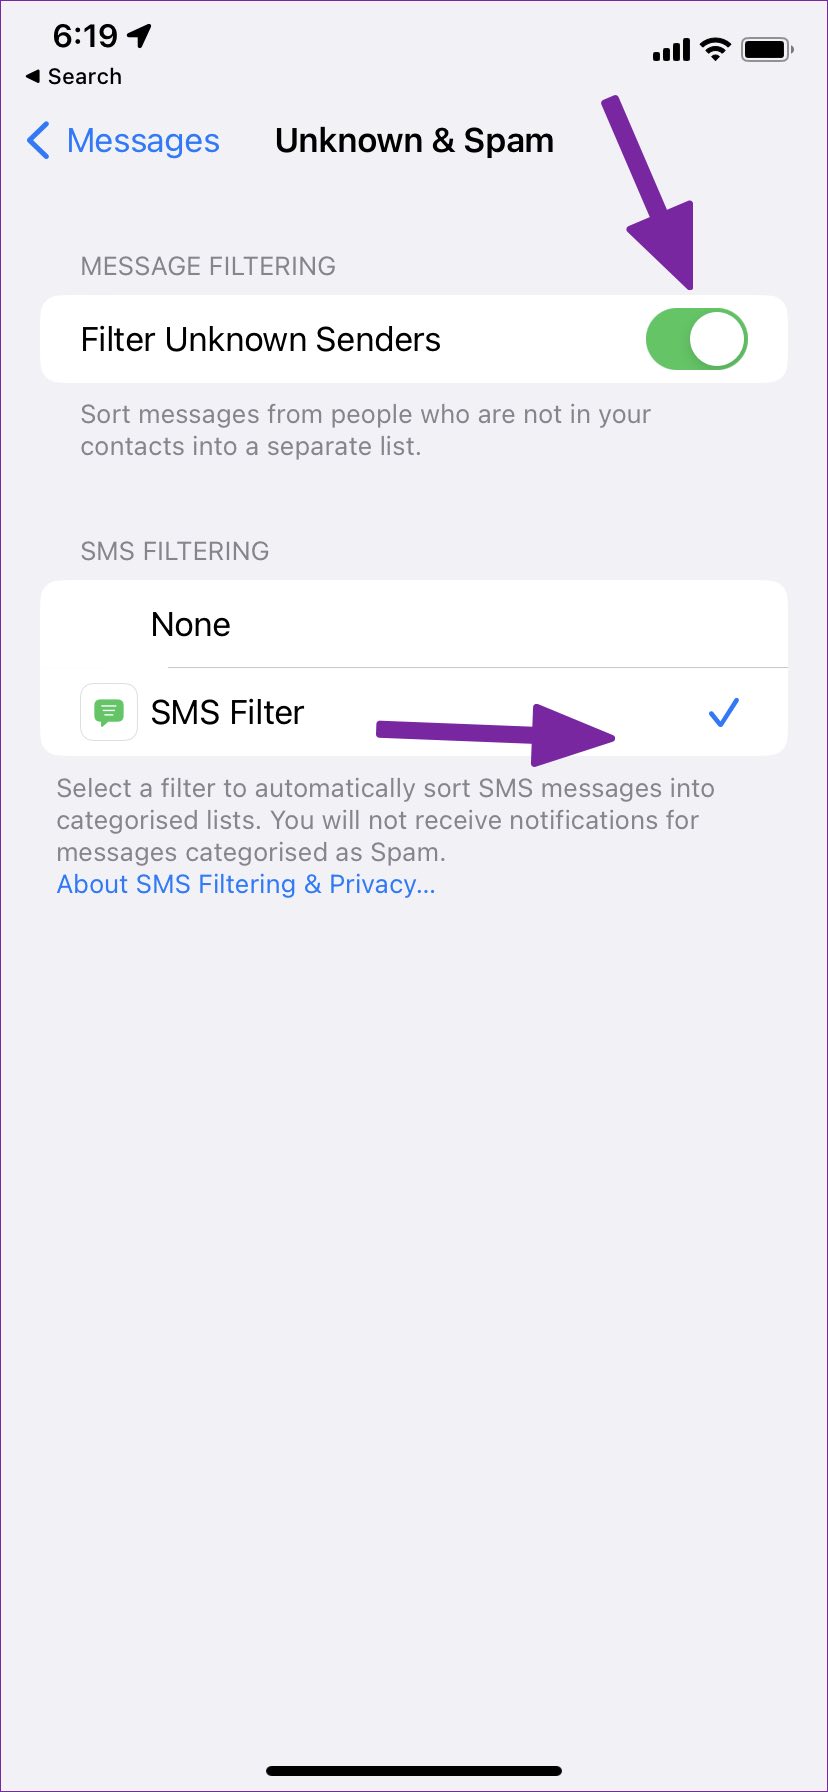 Enable SMS filter on iPhone